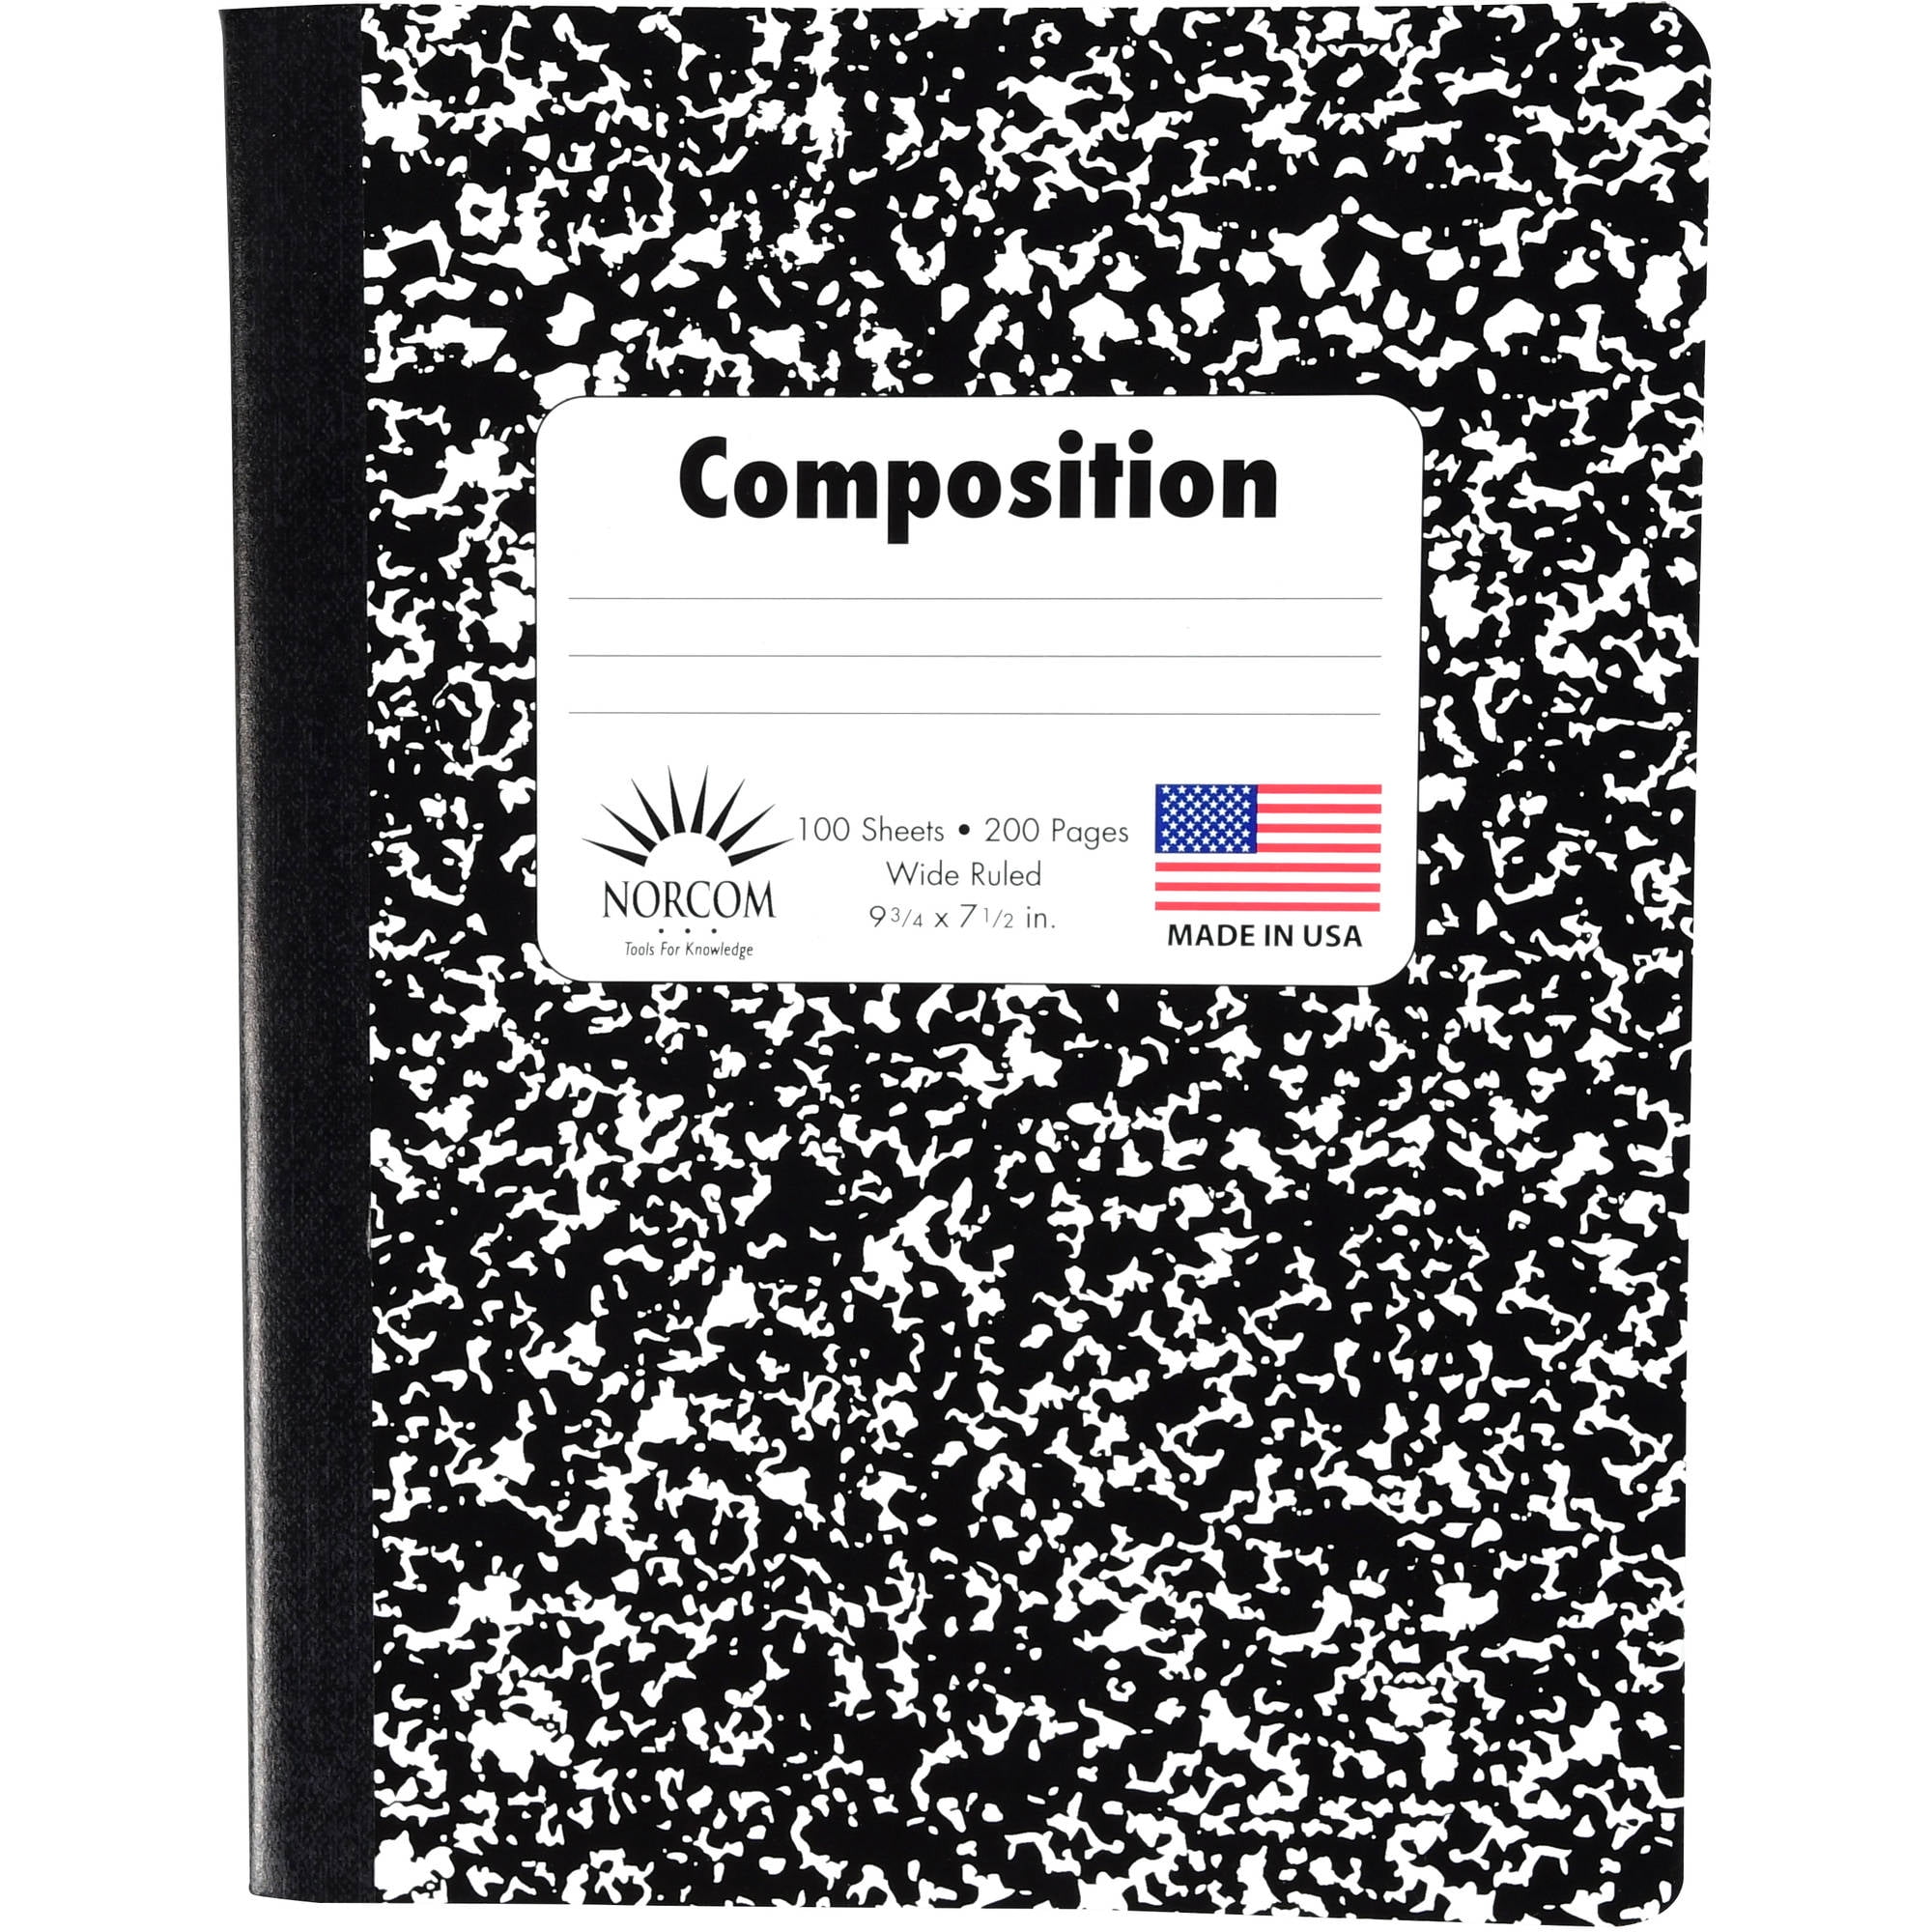 Composition Notebook Wide Ruled 100 Sheets 200 Pages School Planner 5 Notebooks